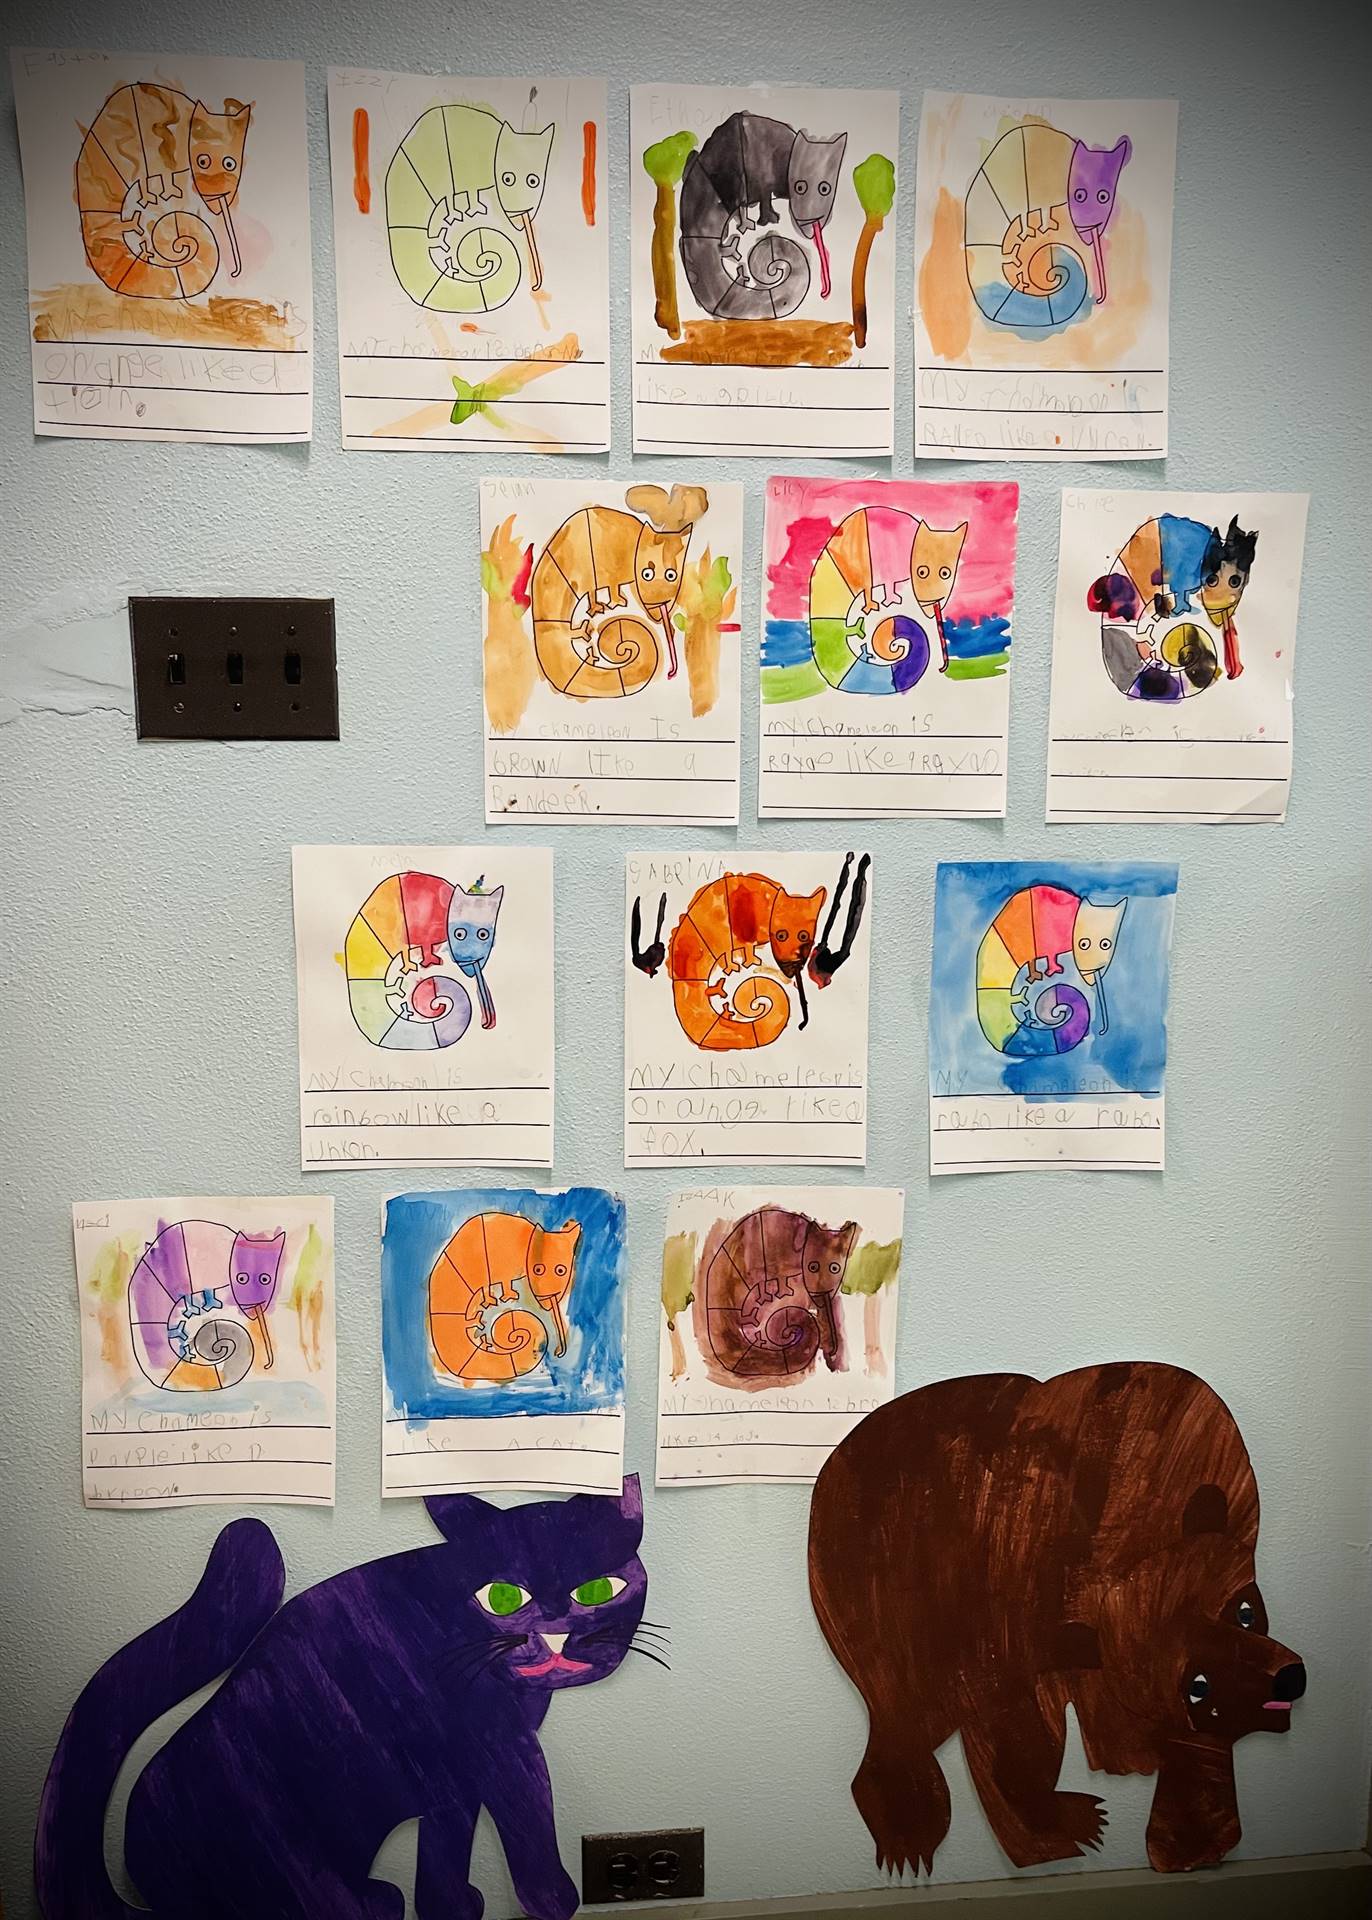 a wall with a blue cat and brown bear and colorful artwork